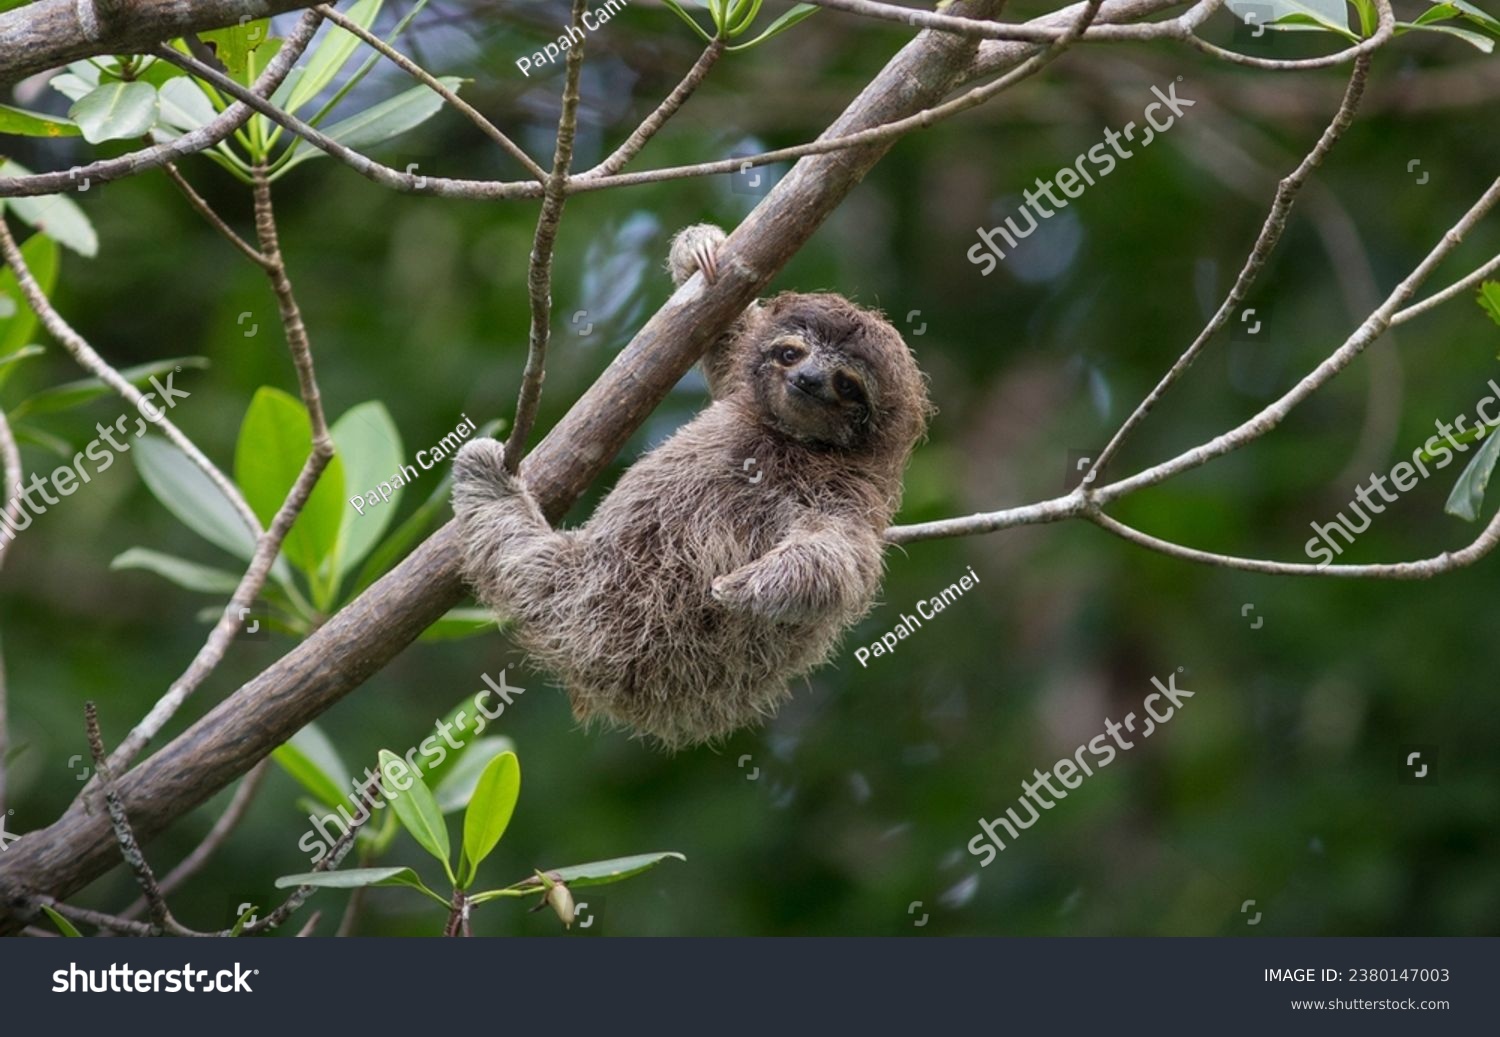 The adorable pygmy three-toed sloth, with its untamed hairstyle and friendly demeanor, is a rare find indeed.  #2380147003